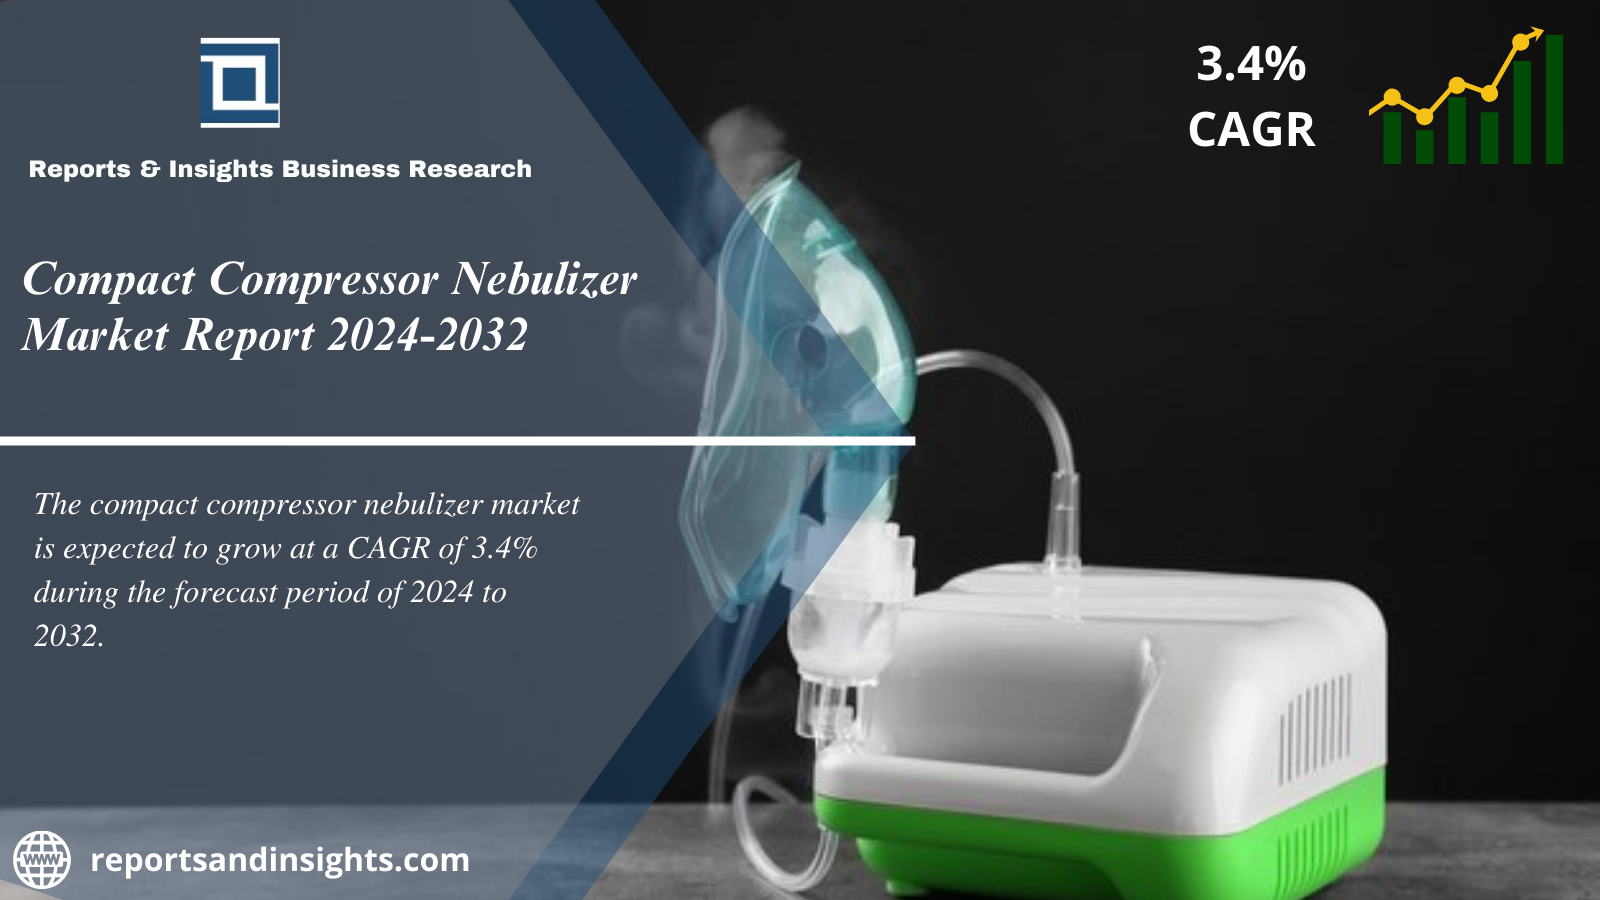 Compact Compressor Nebulizer Market Industry Overview, Growth, Trends, Share, Size, Demand and Analysis